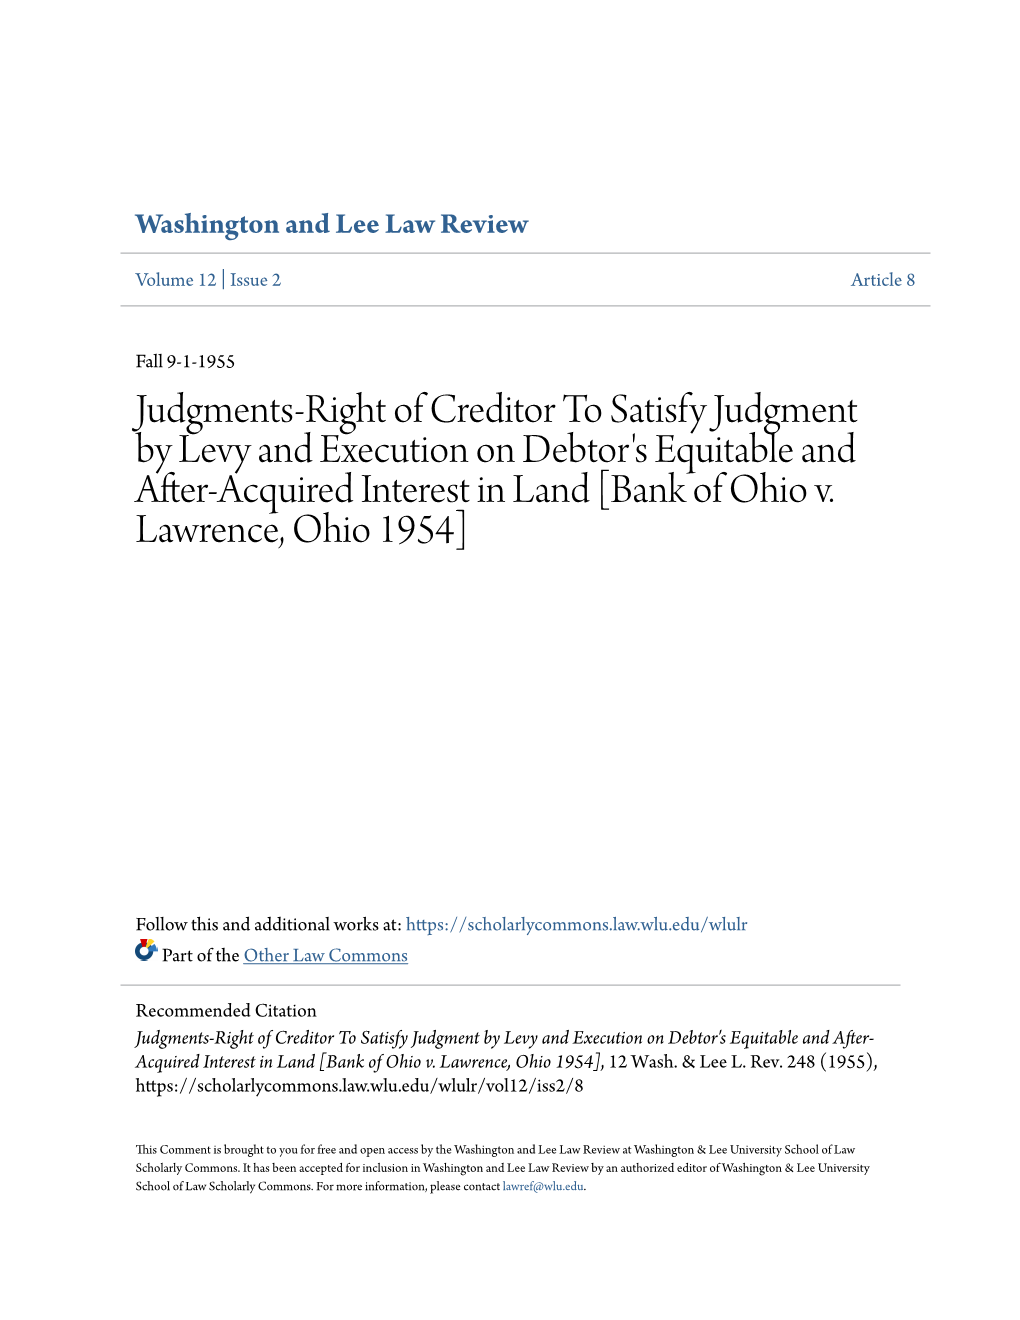 Judgments-Right of Creditor to Satisfy Judgment by Levy and Execution on Debtor's Equitable and After-Acquired Interest in Land [Bank of Ohio V